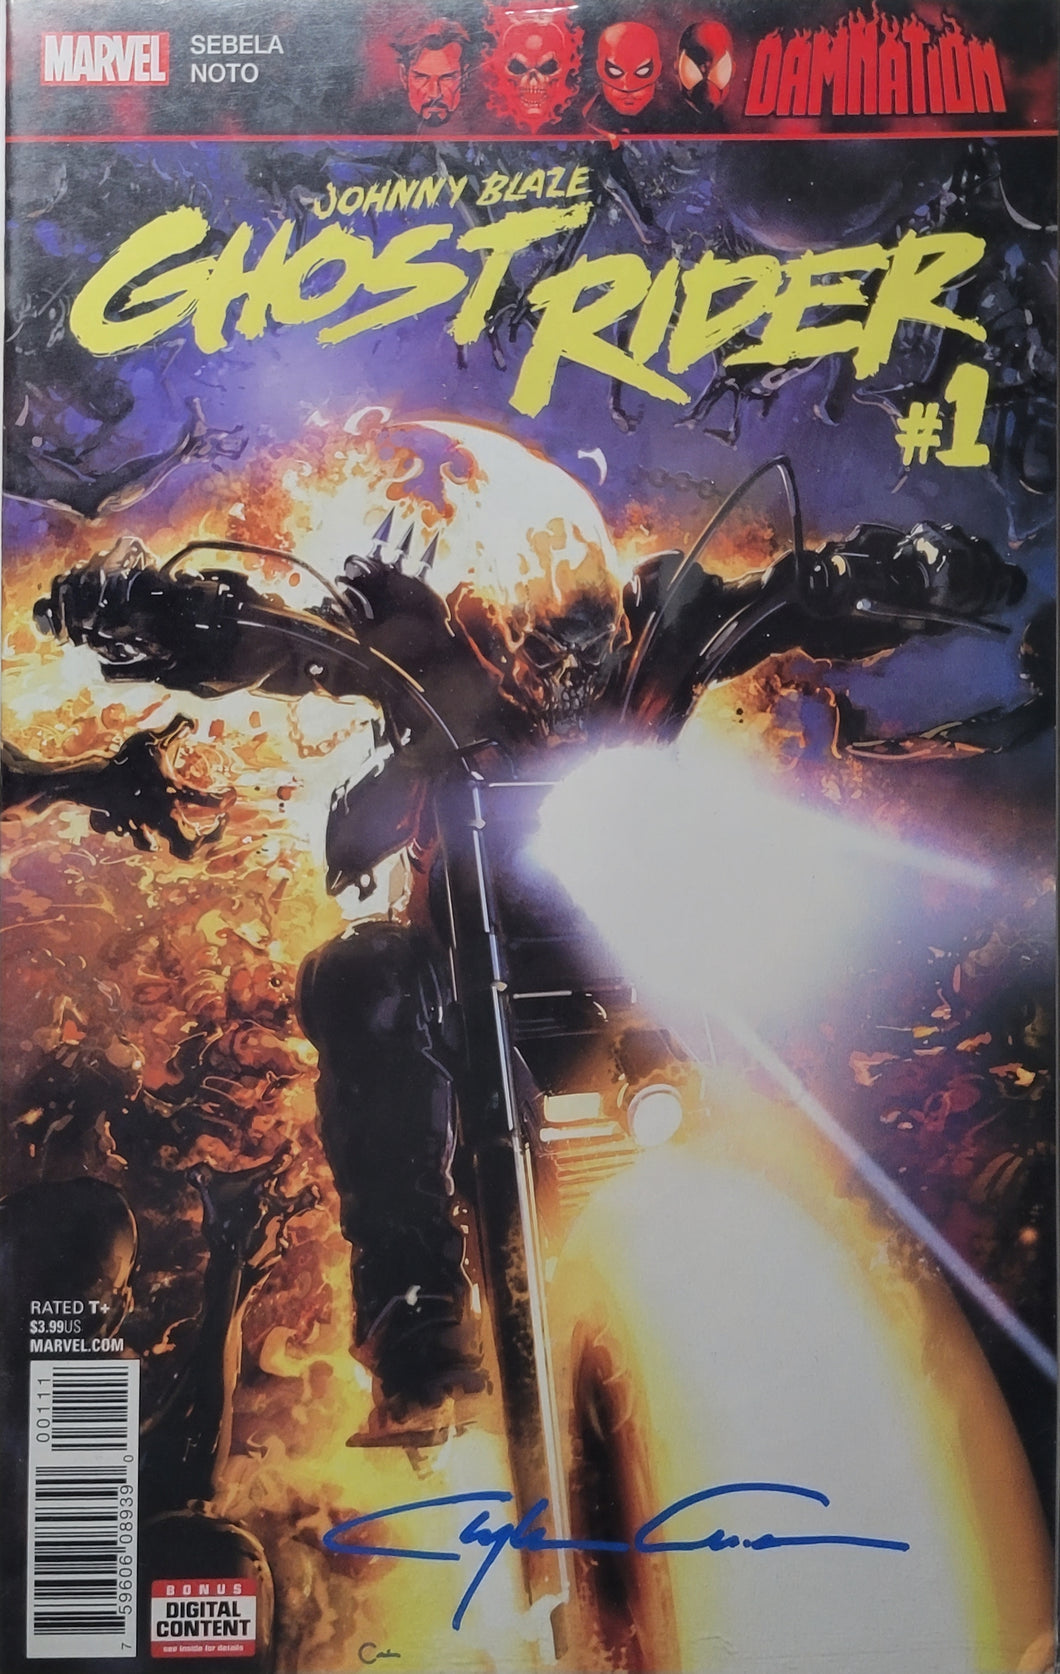 Damnation: Johnny Blaze - Ghost Rider #1 Cover by Clayton Crain - Signed by Clayton Crain w/COA